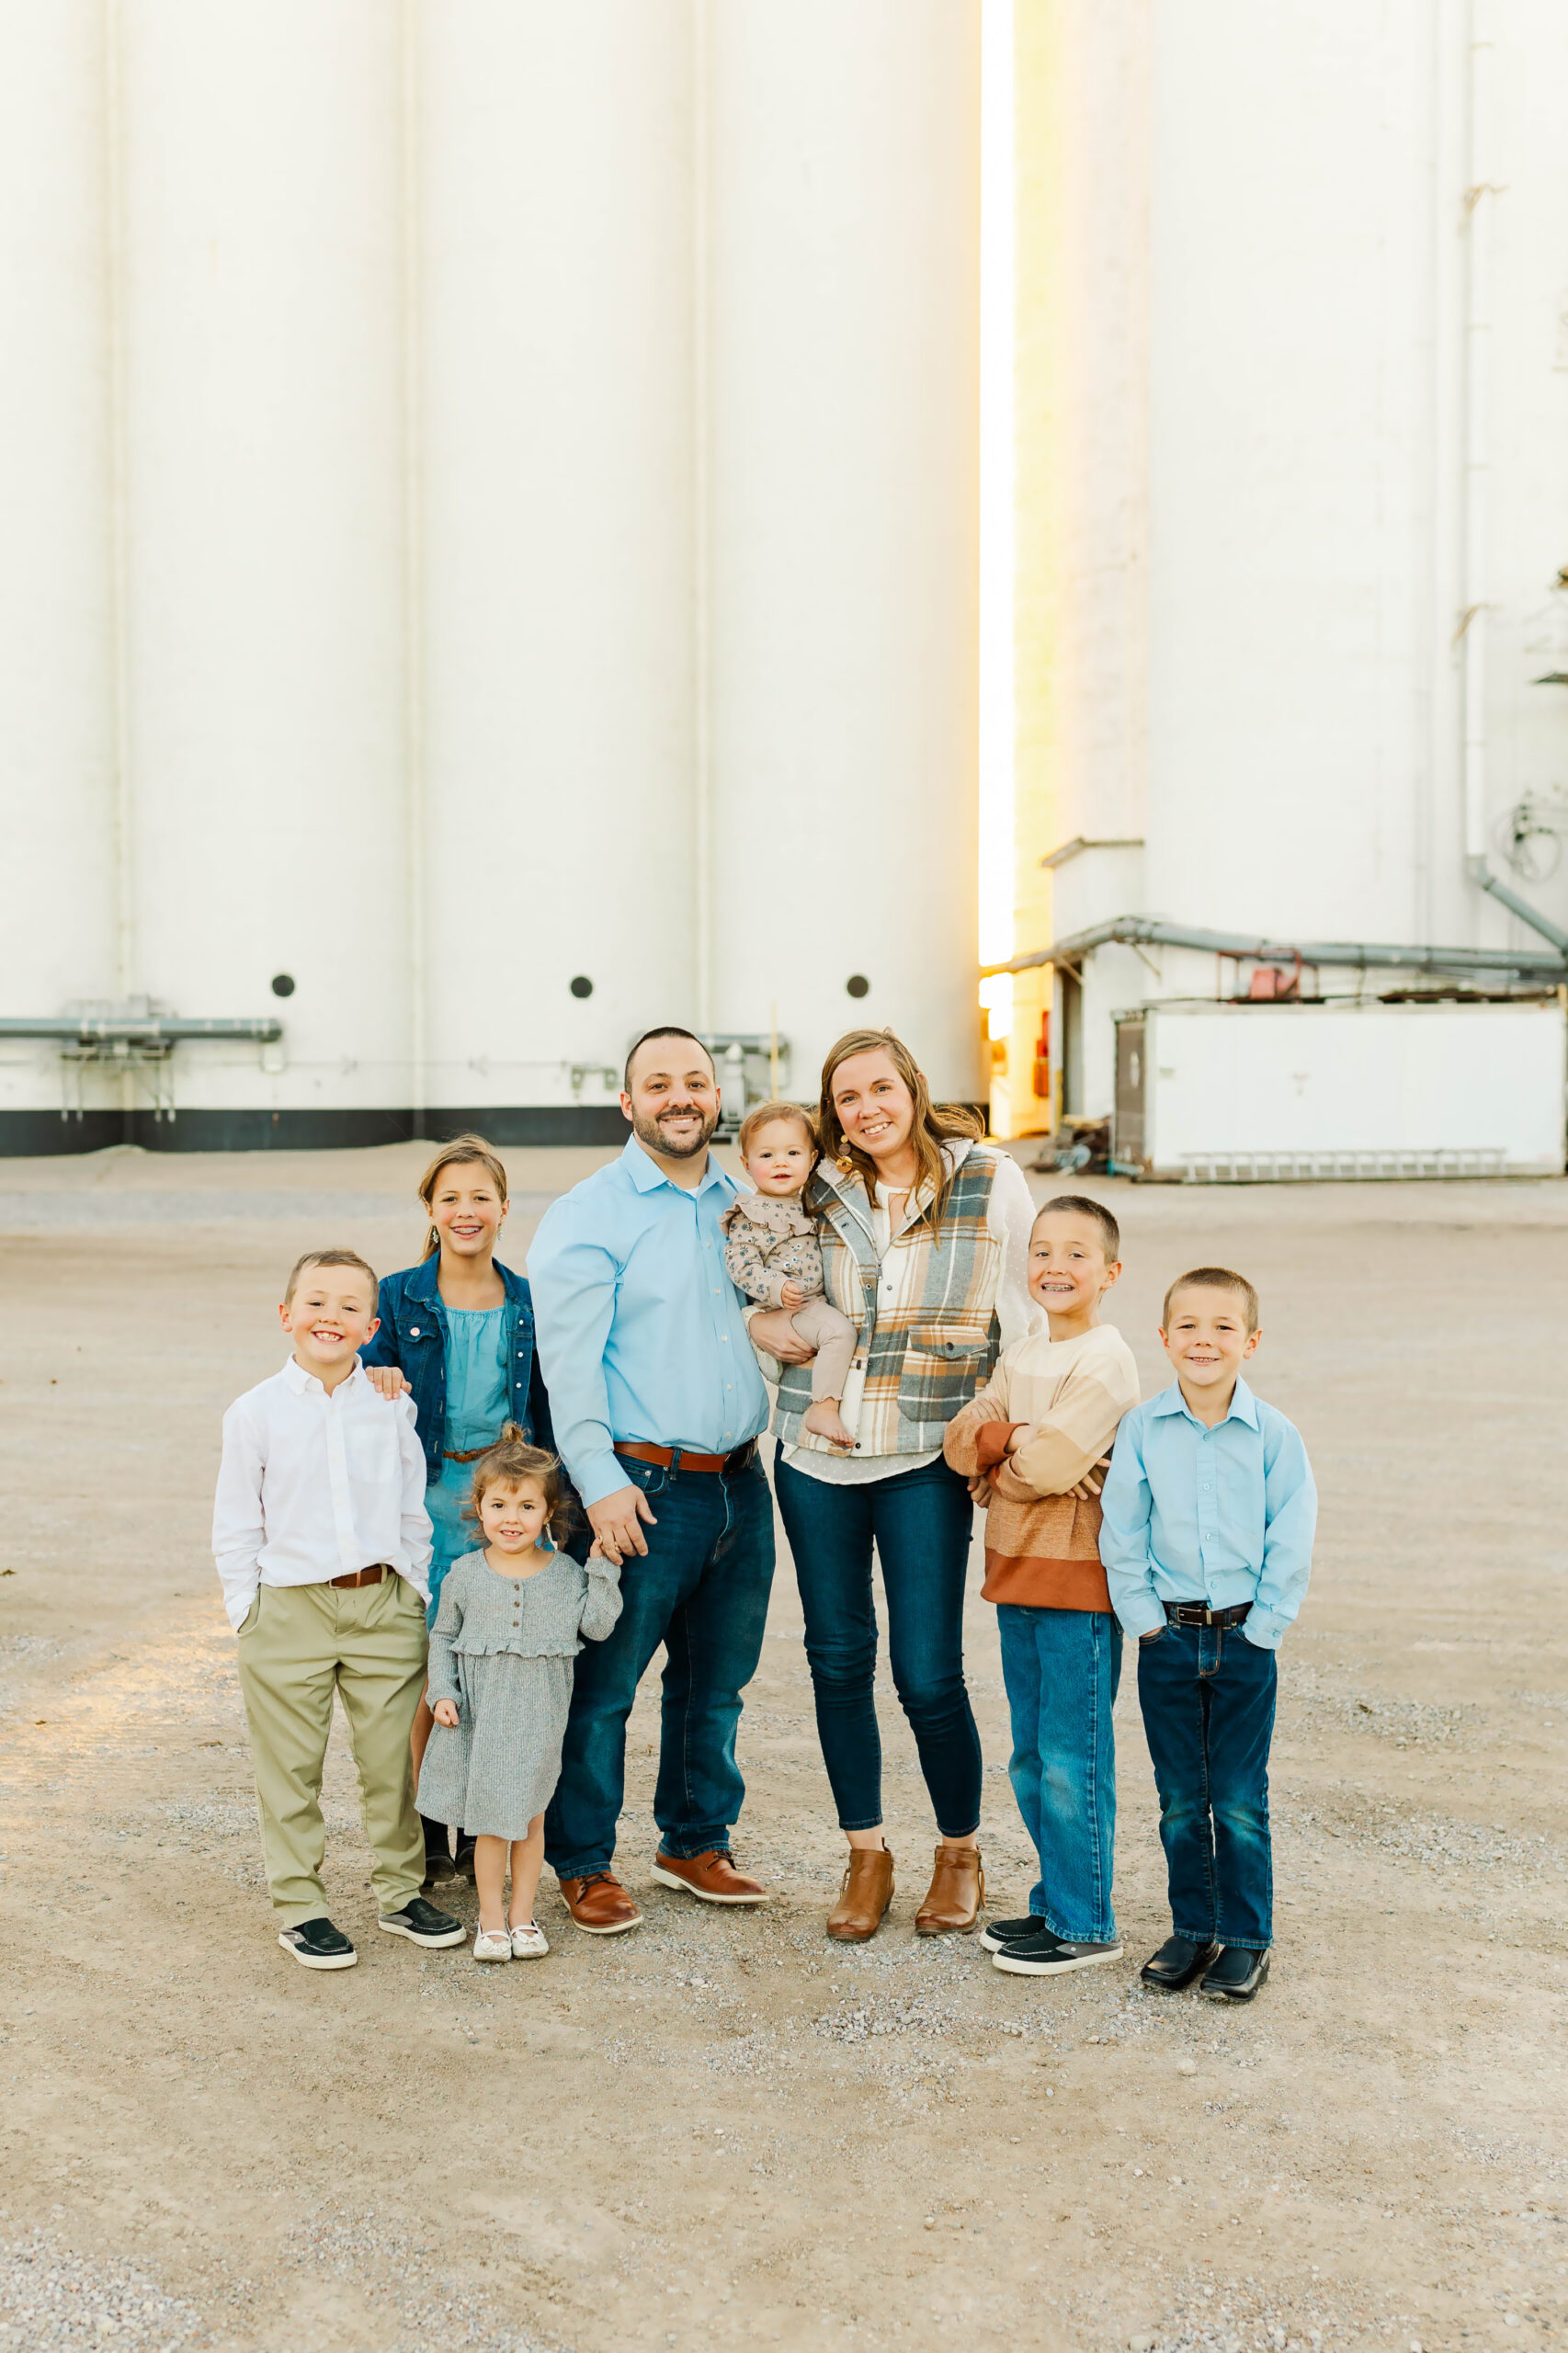 Tyler Meyer, CFP professional and his family